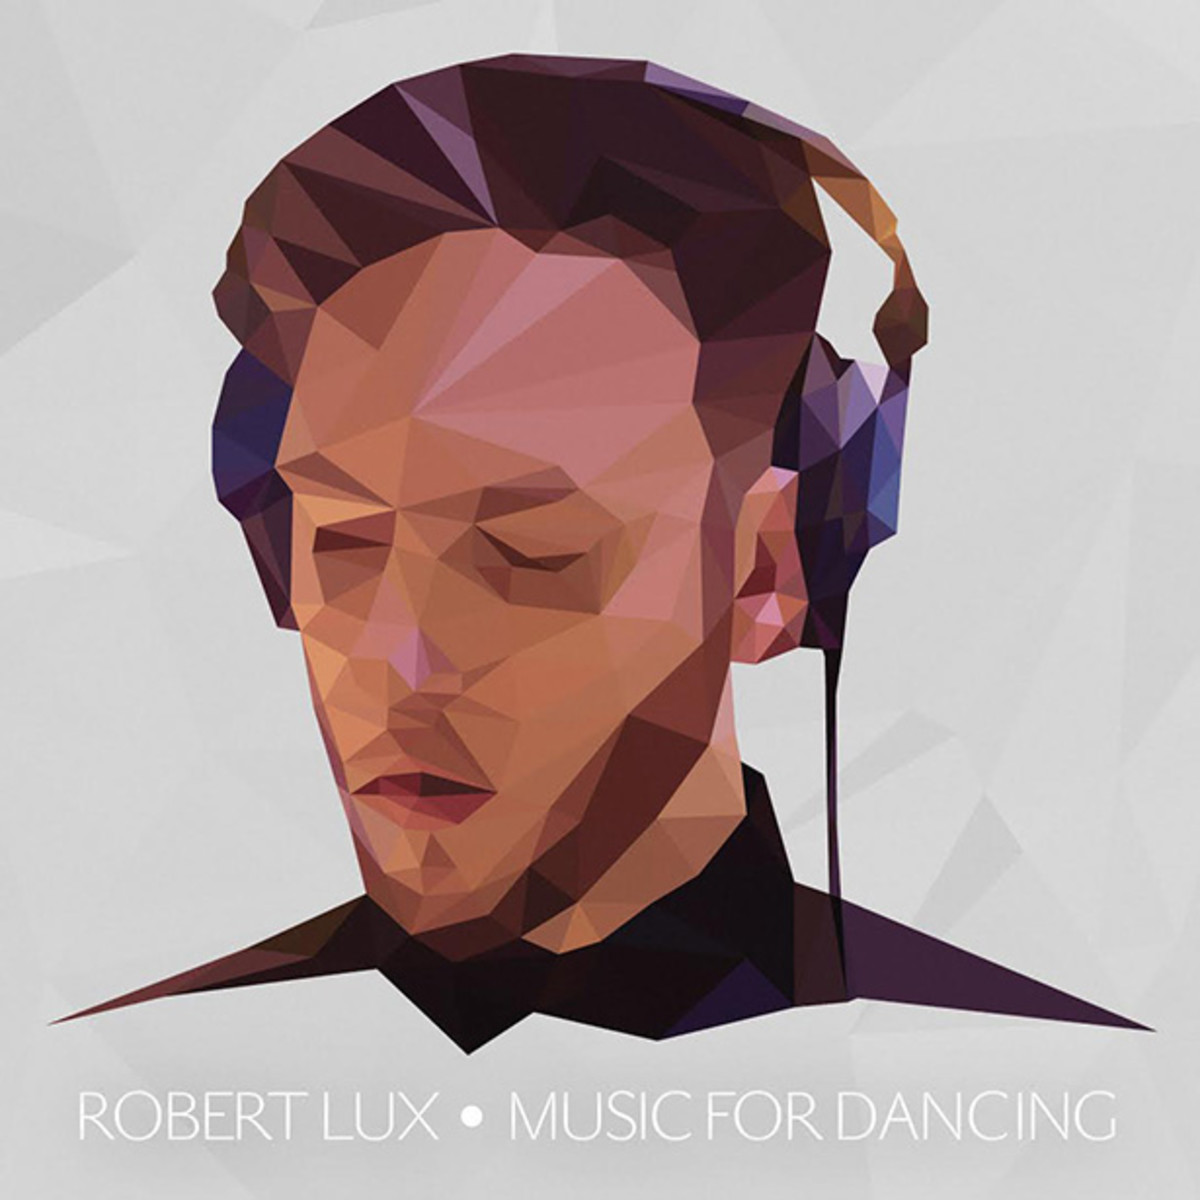 PREMIERE: Robert Lux - Music For Dancing EP